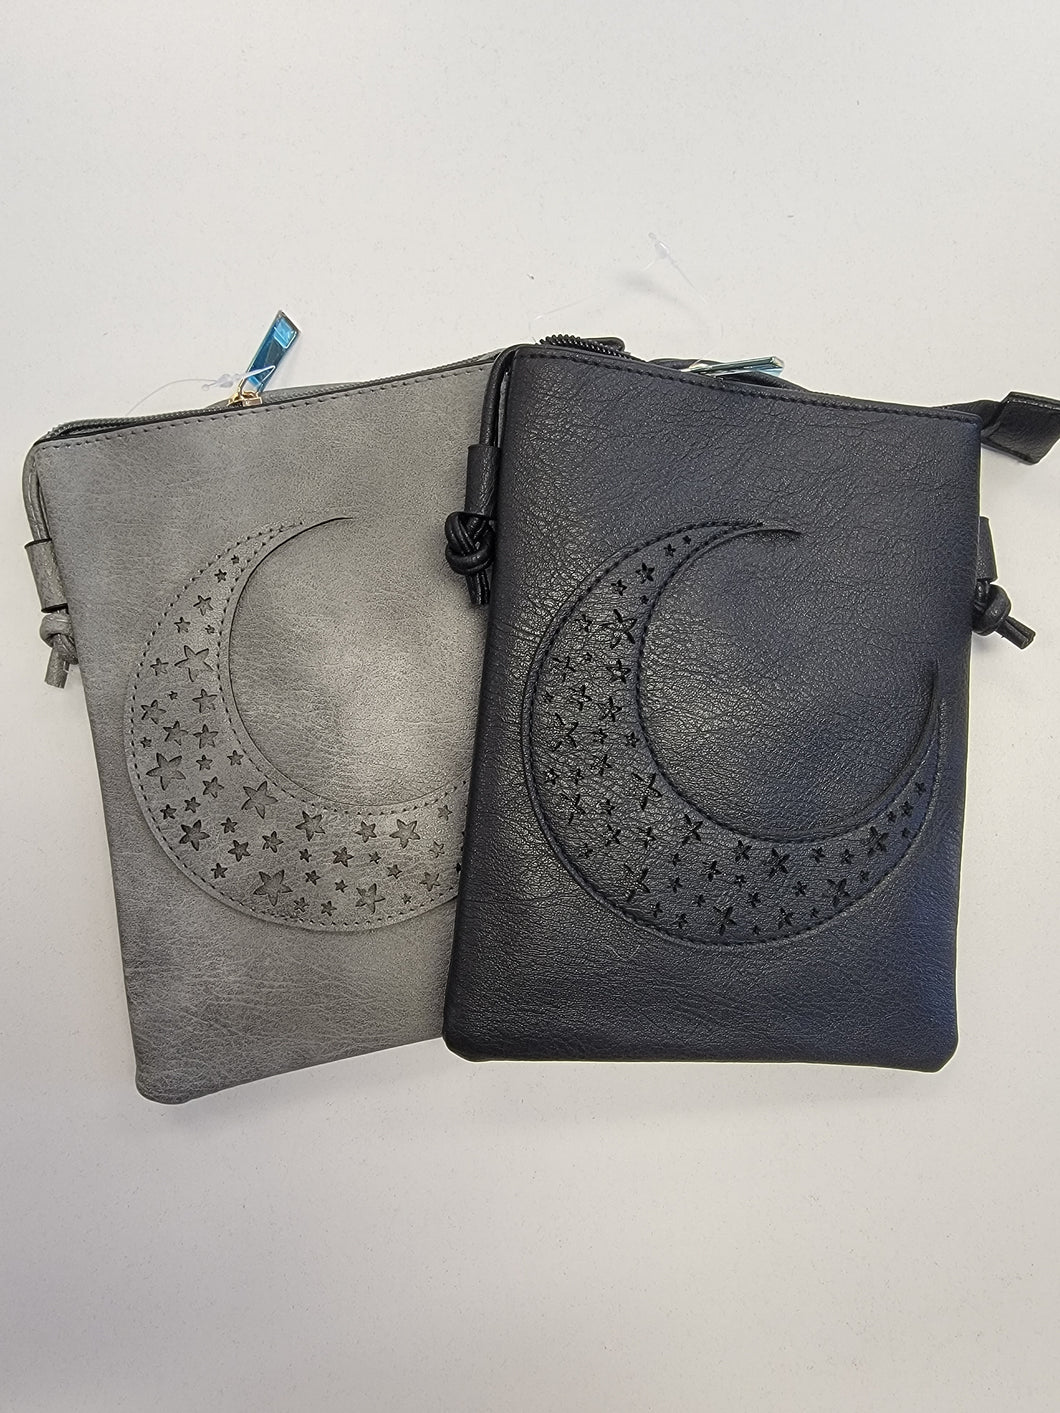 Crescent Moon Crossbody Faux Leather Purse